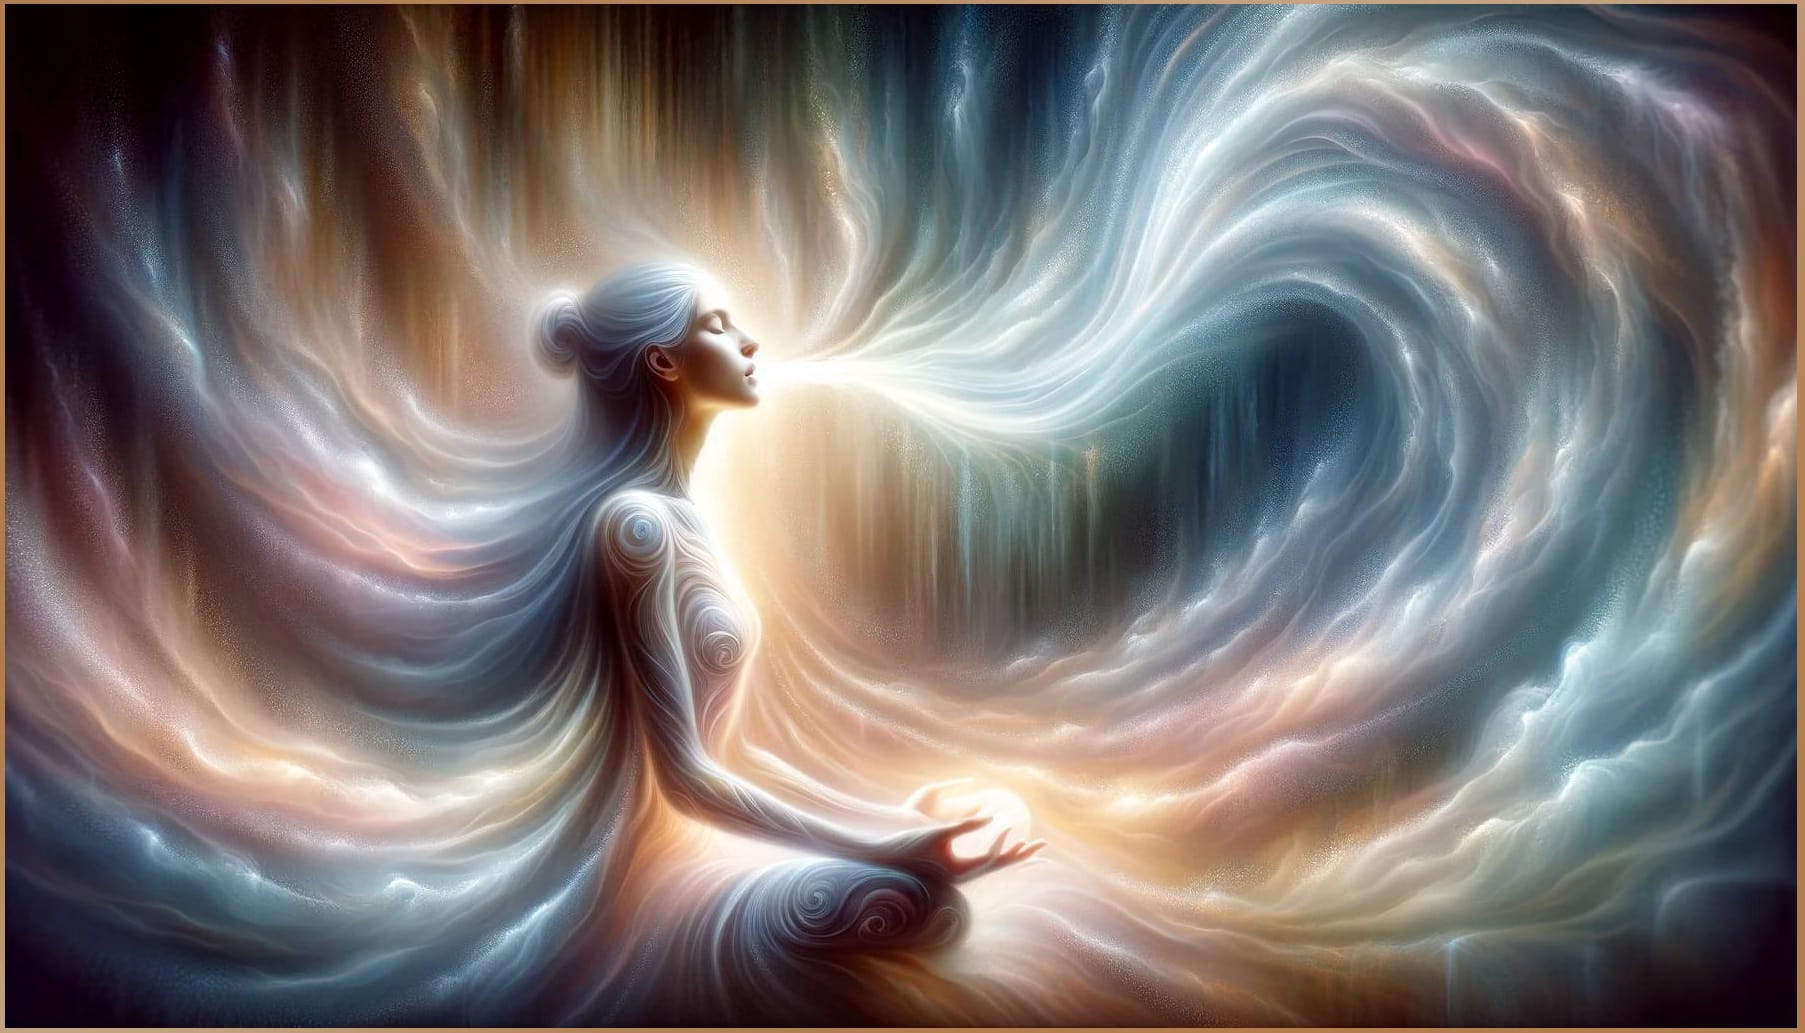 An artistic representation of a woman immersed in the slow living lifestyle, with prana energy flowing from her in a peaceful swirl of colors, symbolizing a mindful connection with the vital life forces.